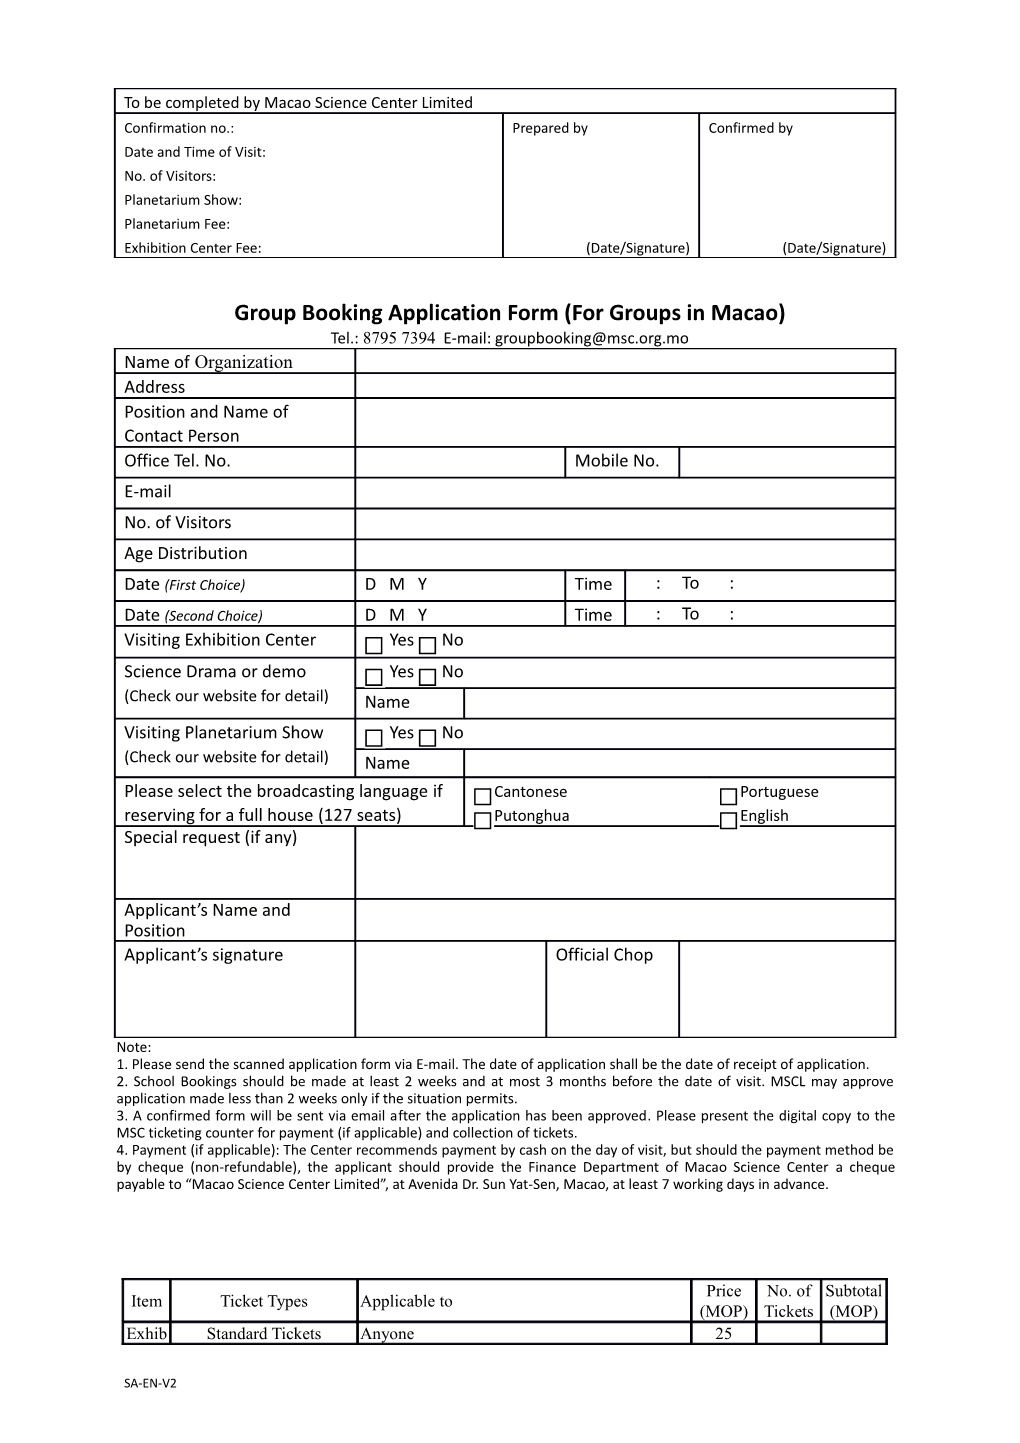 Group Booking Application Form (For Groups in Macao)